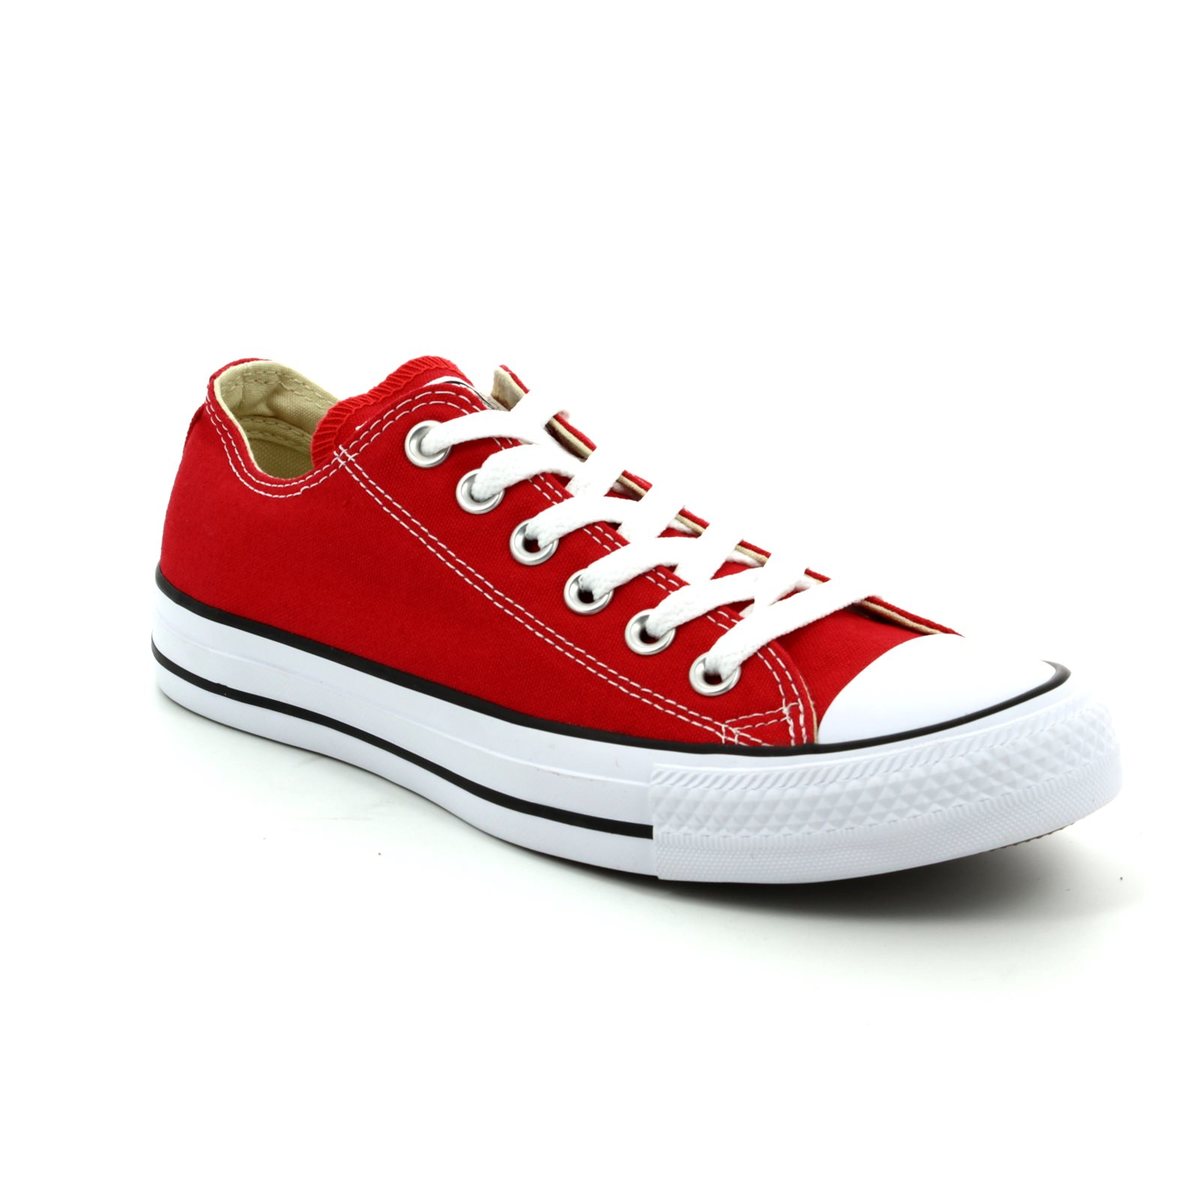 Converse Allstar Ox Red Mens trainers M9696C-600 in a Plain Canvas in Size 10